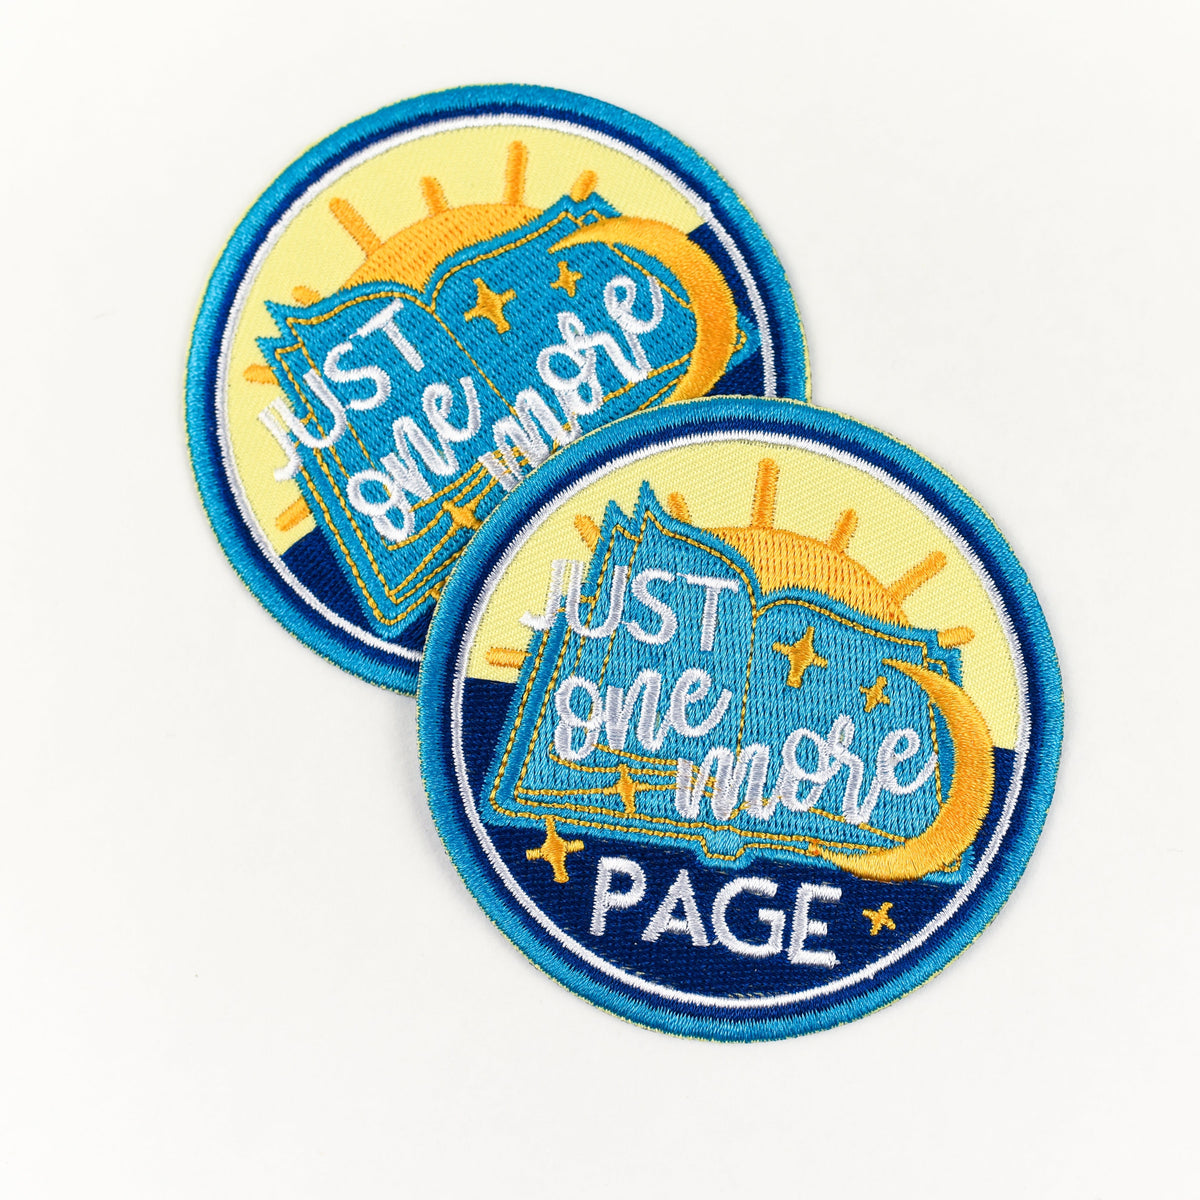 One More Page Patch is blue, yellow and white with a book, sun and moon and stars, and the words &quot;Just One More Page&quot;